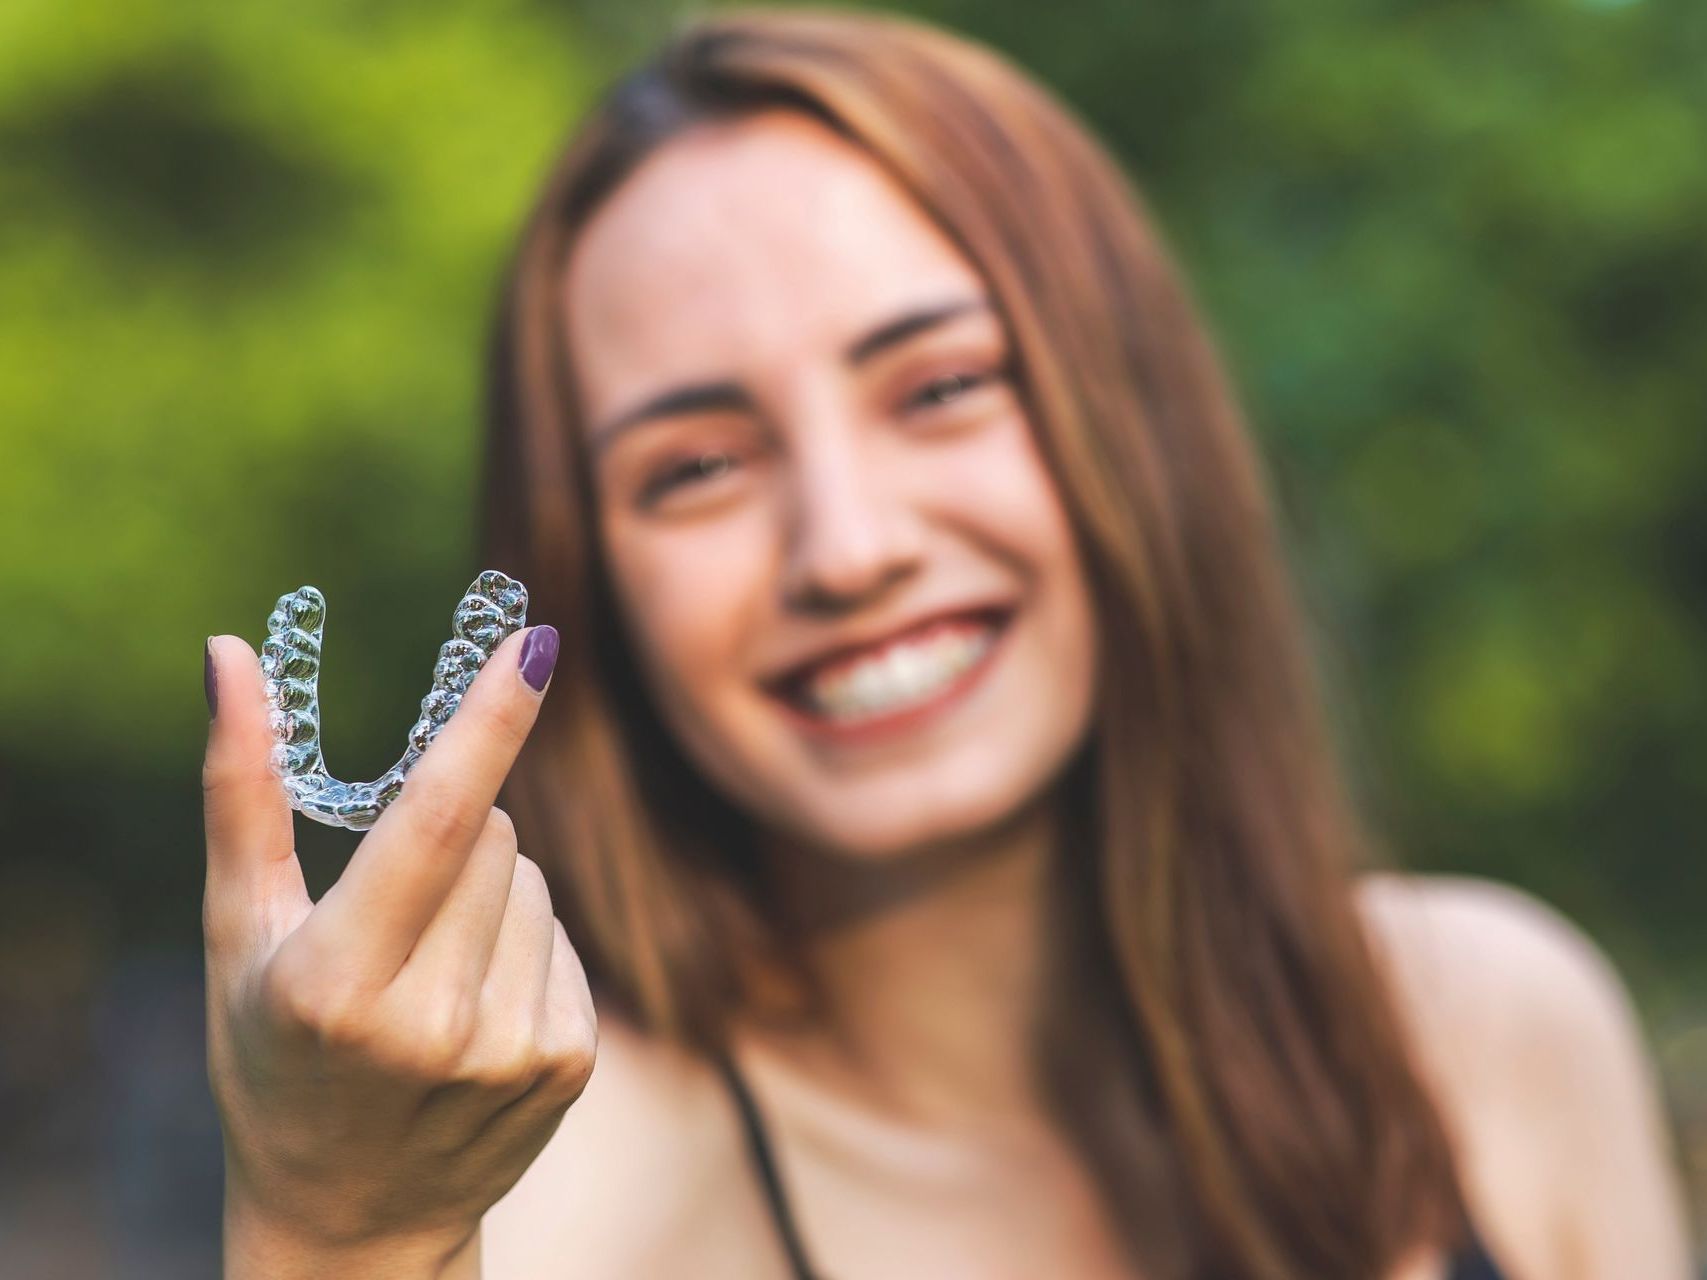 An image of a young woman smiling and holding an Invisalign® clear aligners